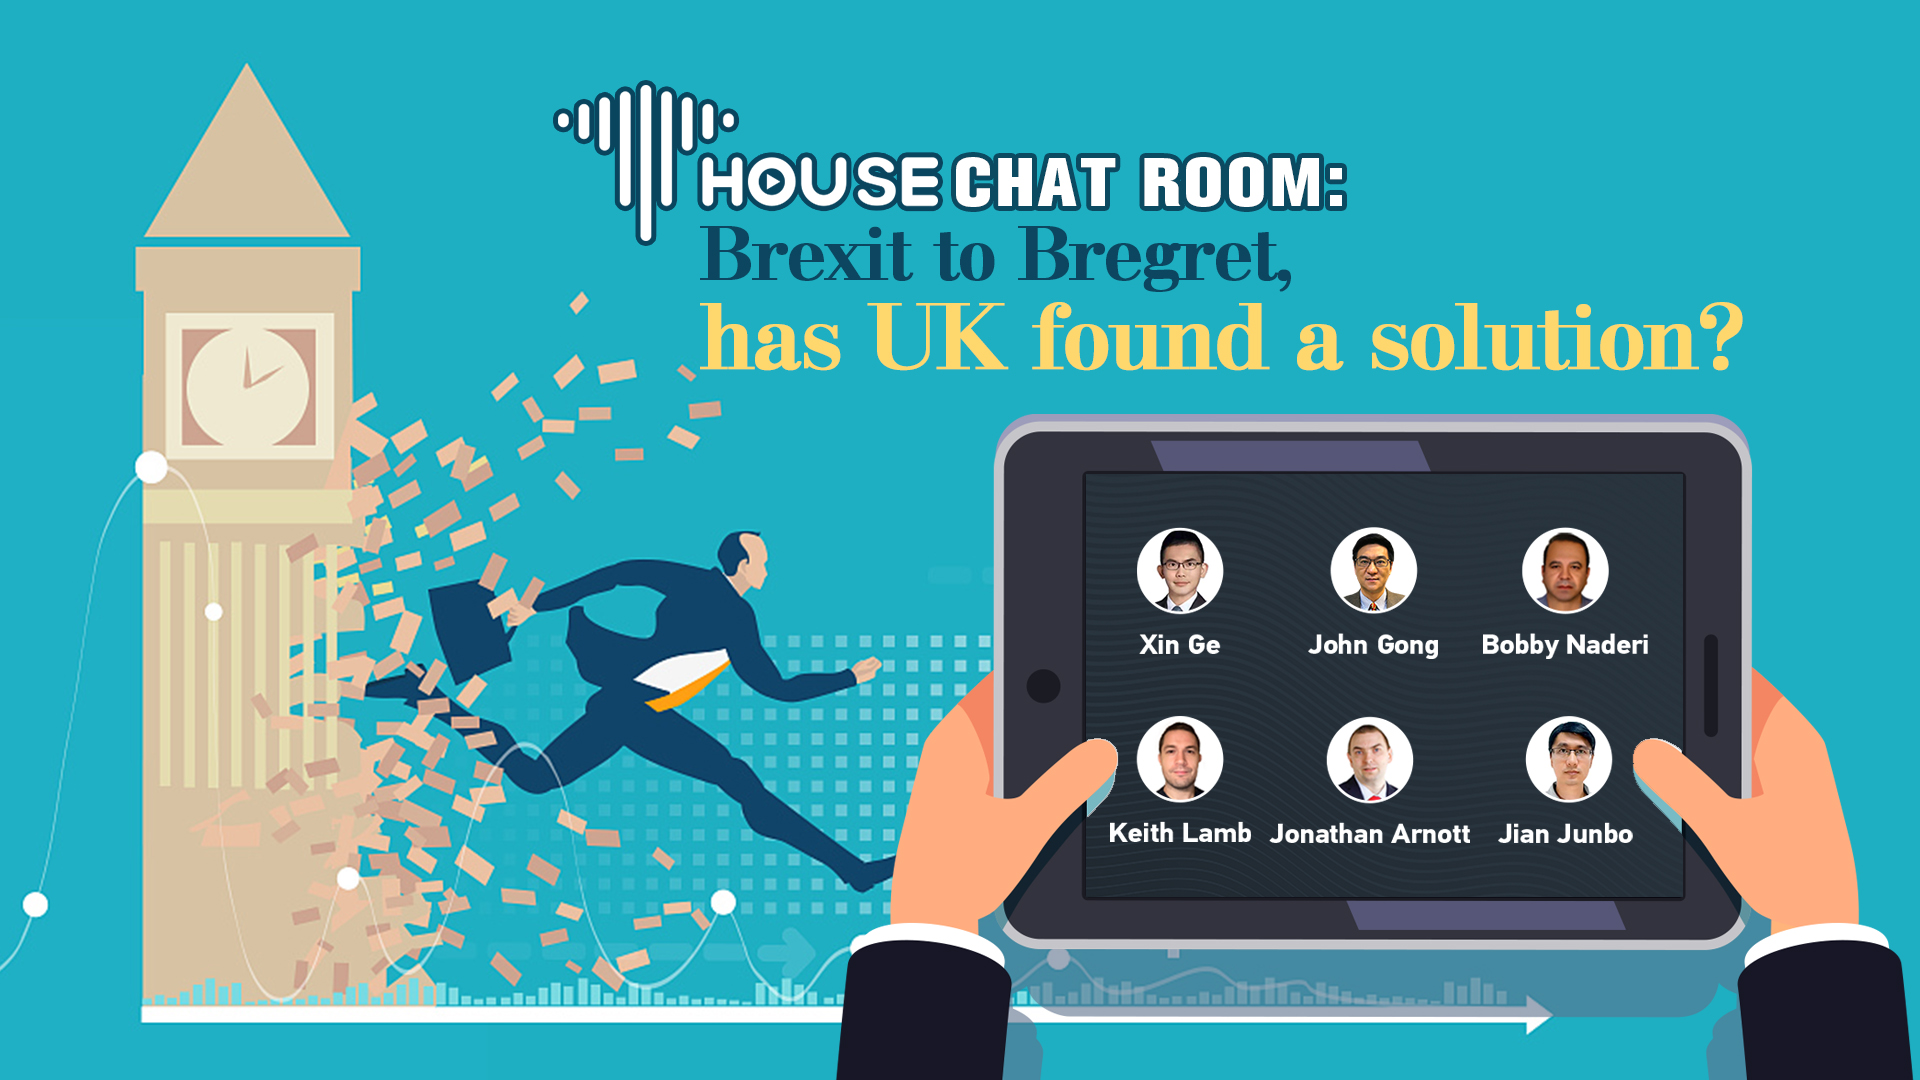 T-House chat room: Brexit to Bregret, has UK found a solution?